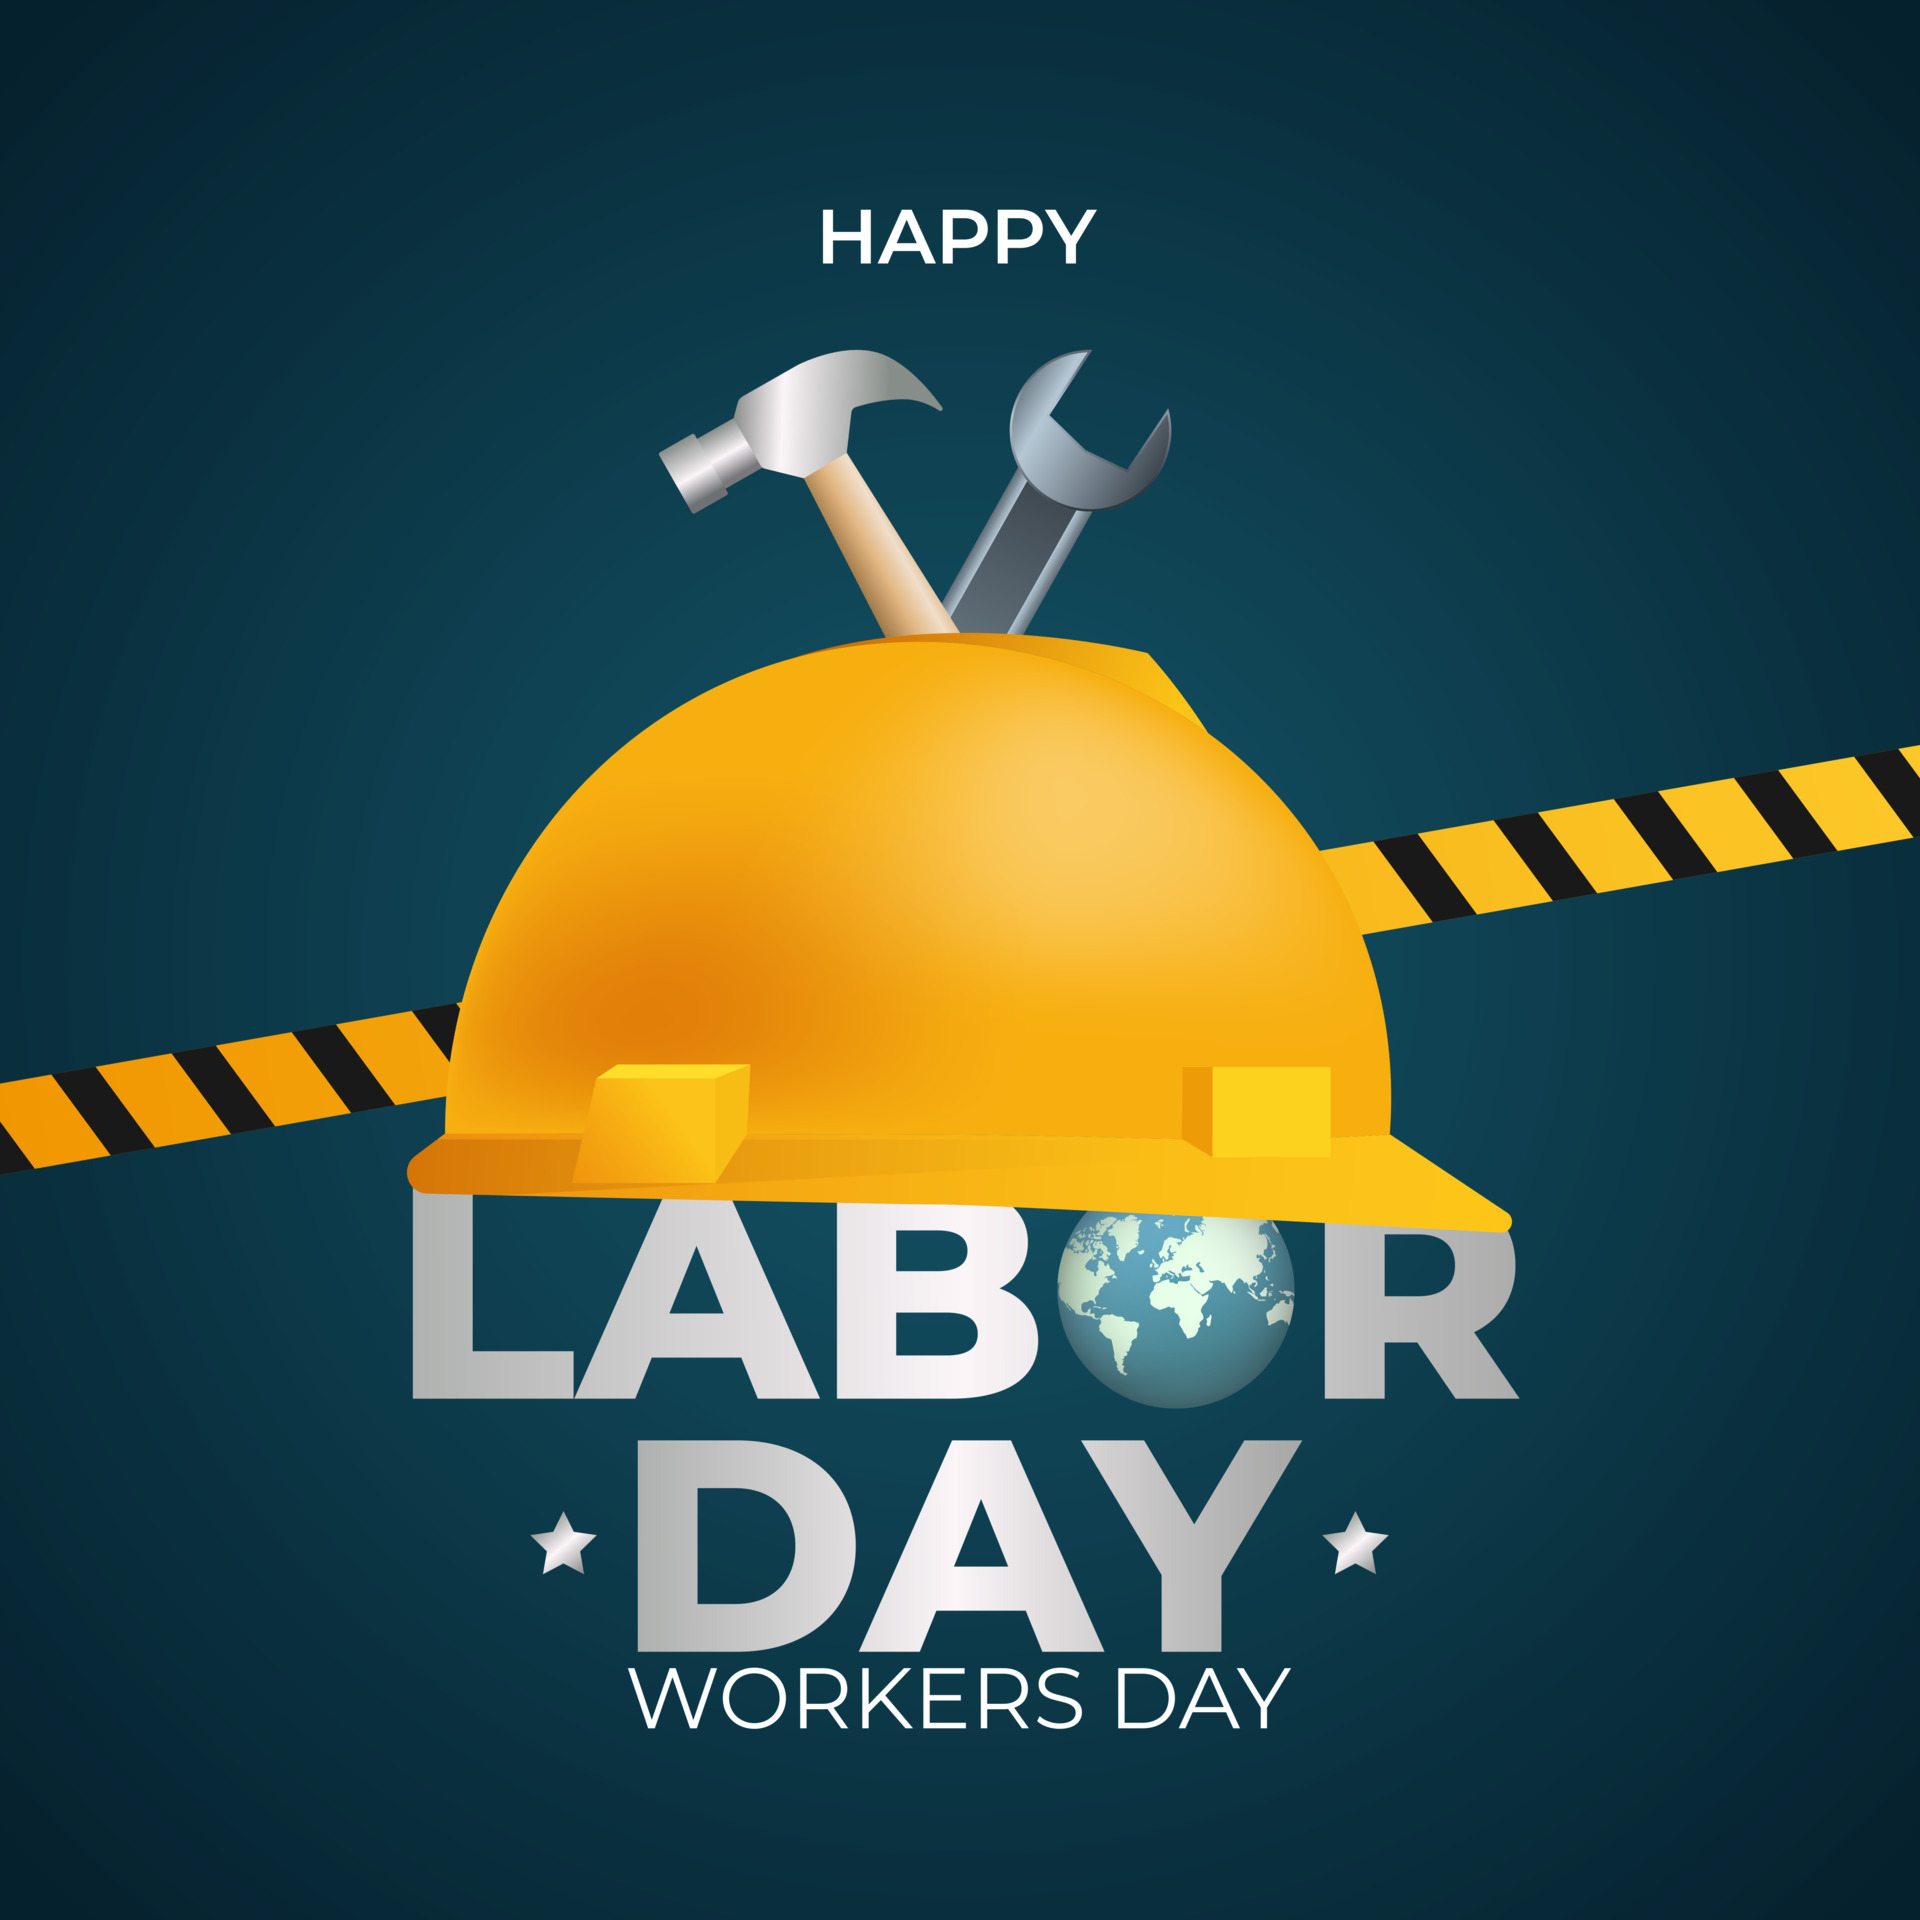 Happy Labor Day of international workers day in 1st May on equipments